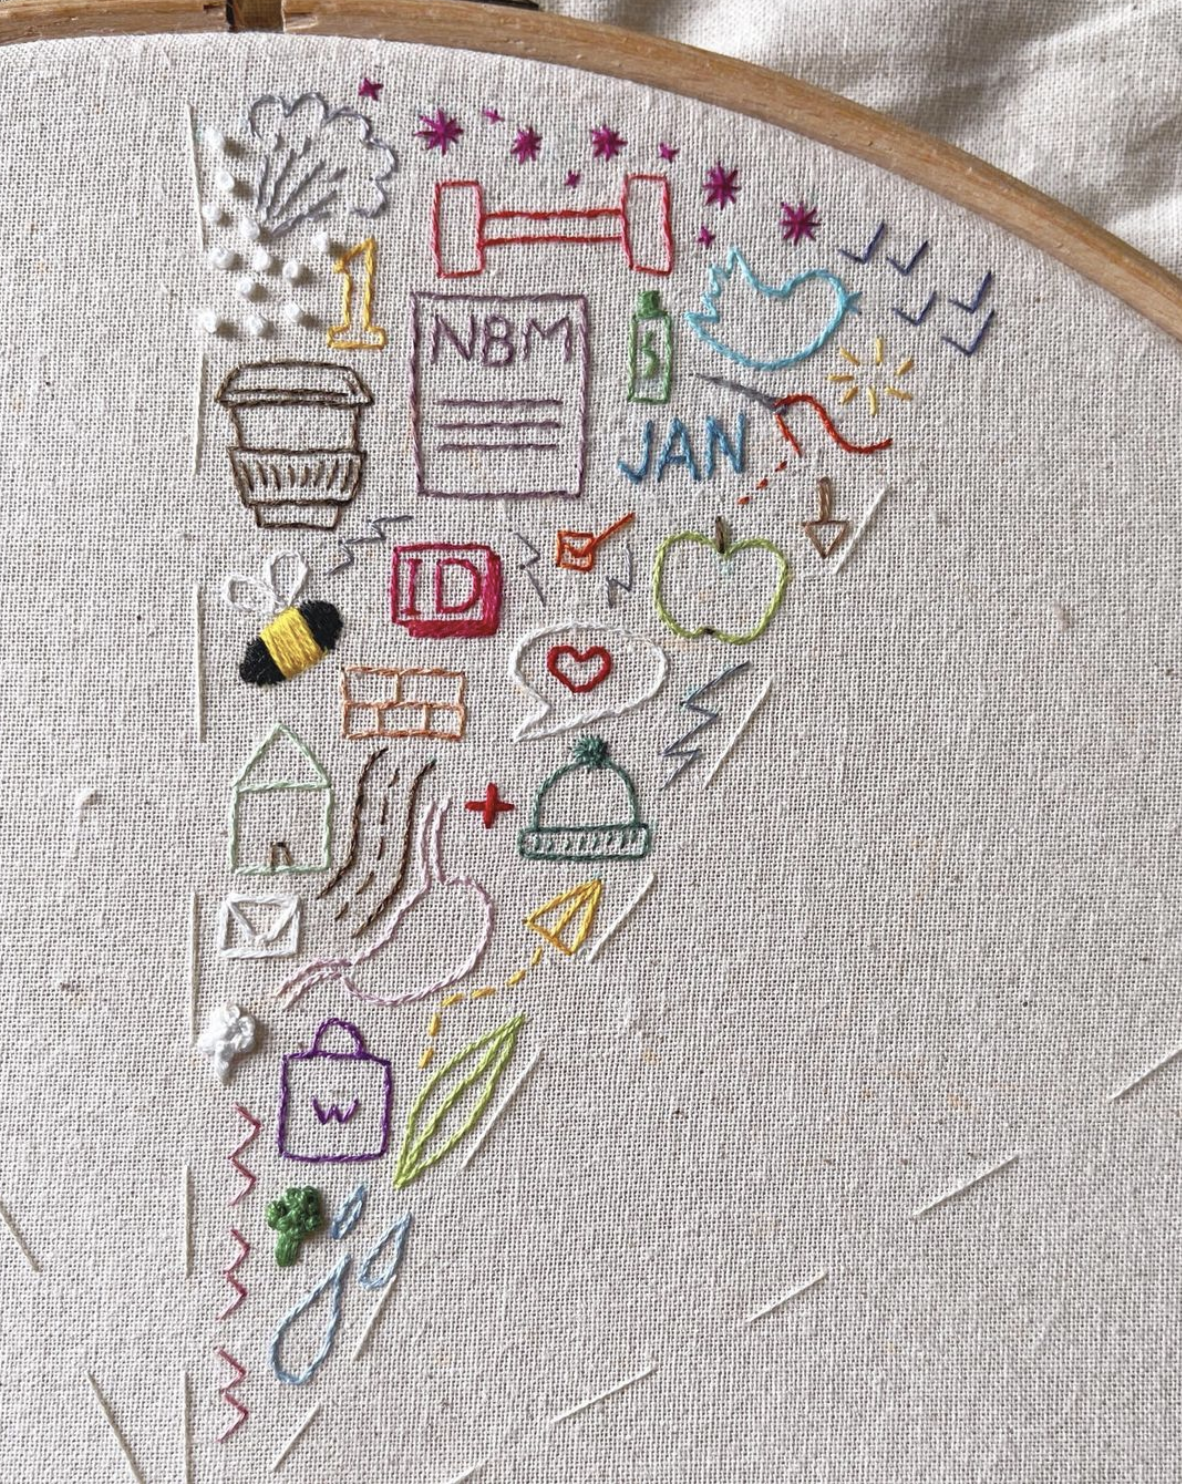 Writer completes embroidery journal documenting 2023 with stitched icons